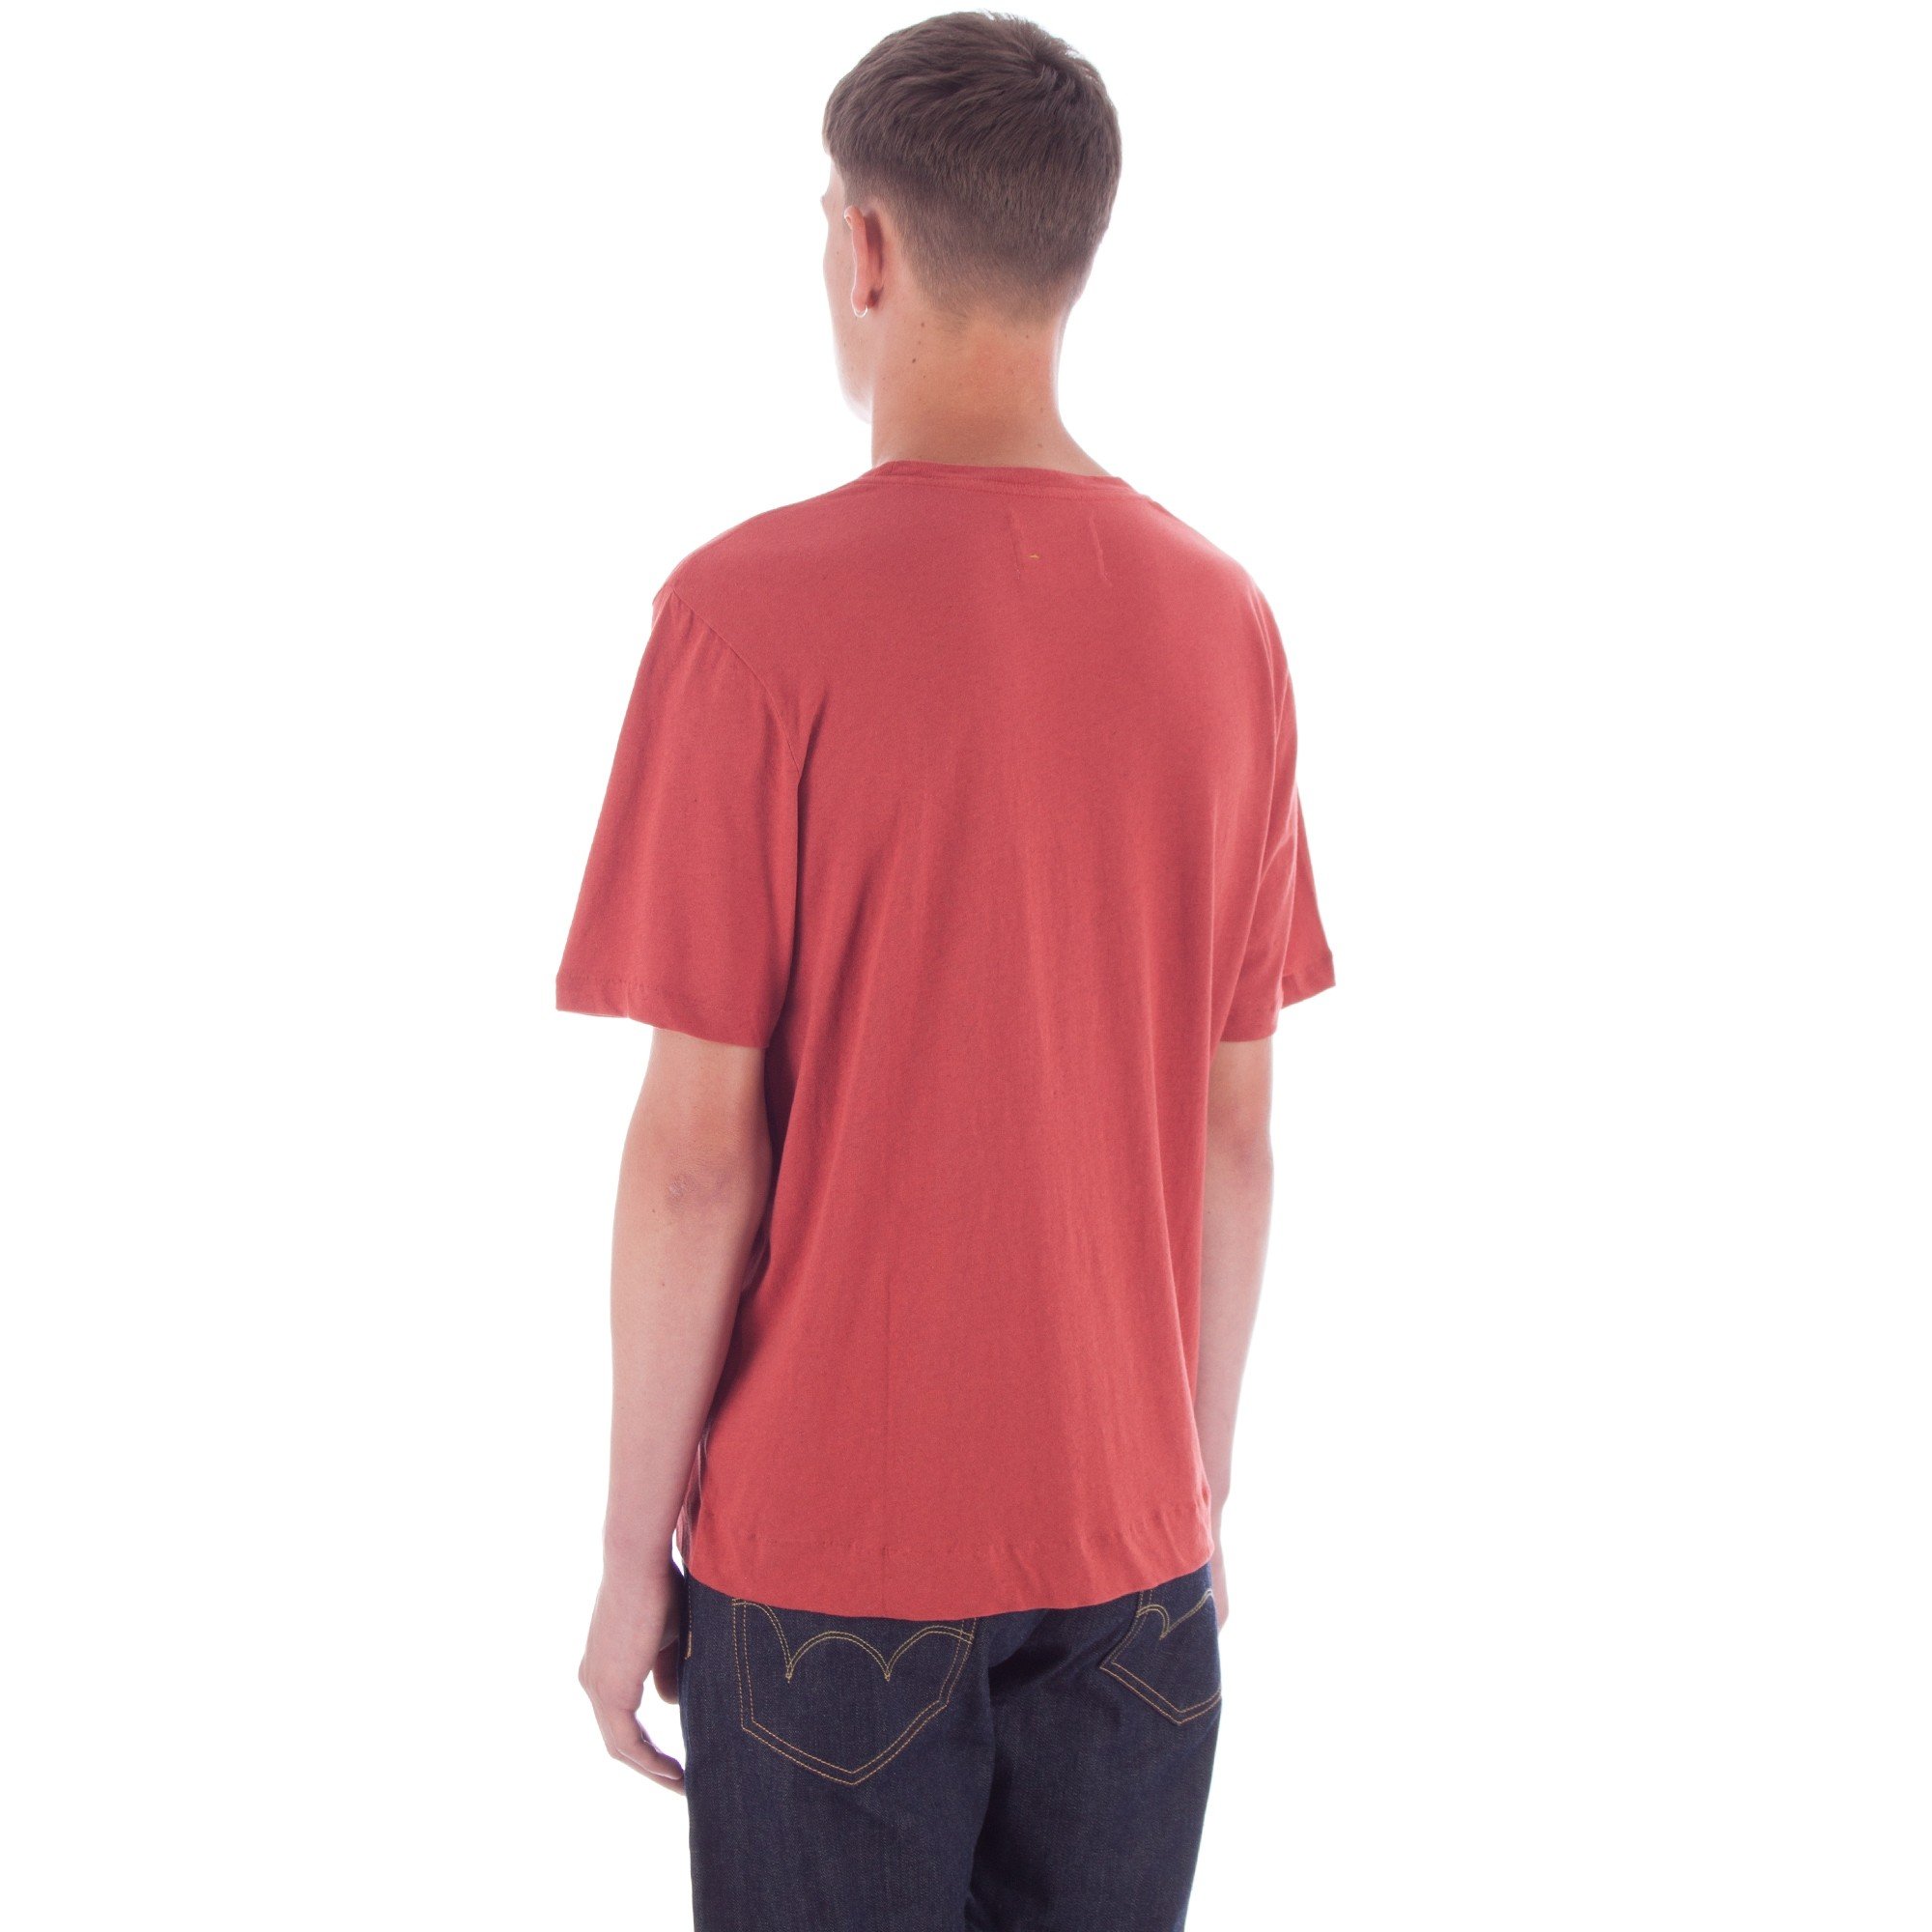 MHL by Margaret Howell Basic T-Shirt (Faded Red) - Consortium.